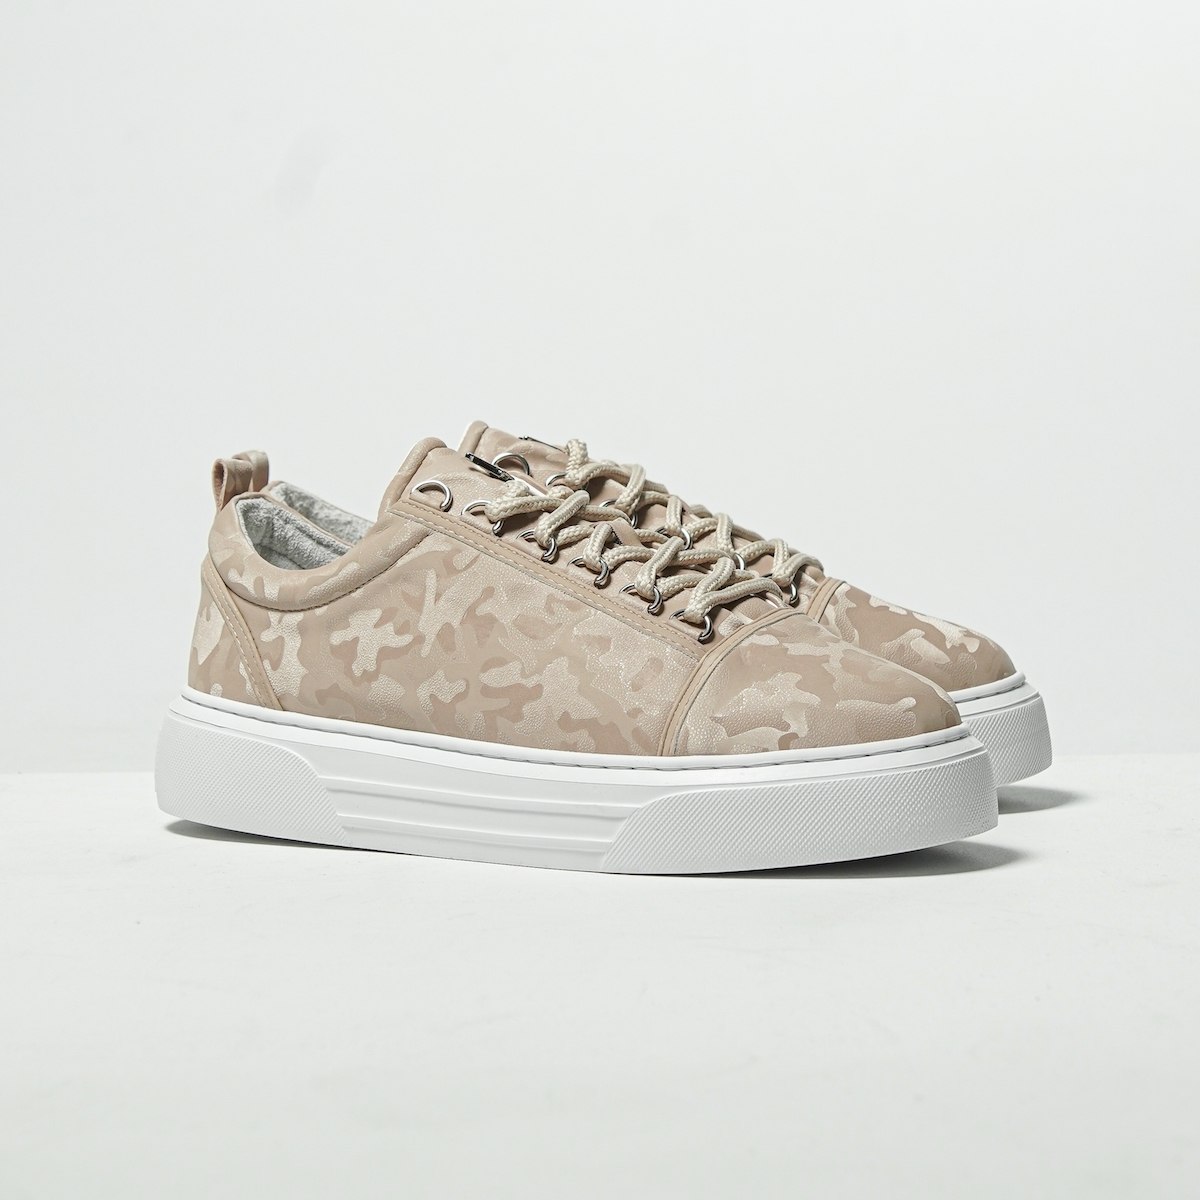 Men's Low Top Sneakers Crowned Shoes Camo Taupe | Martin Valen